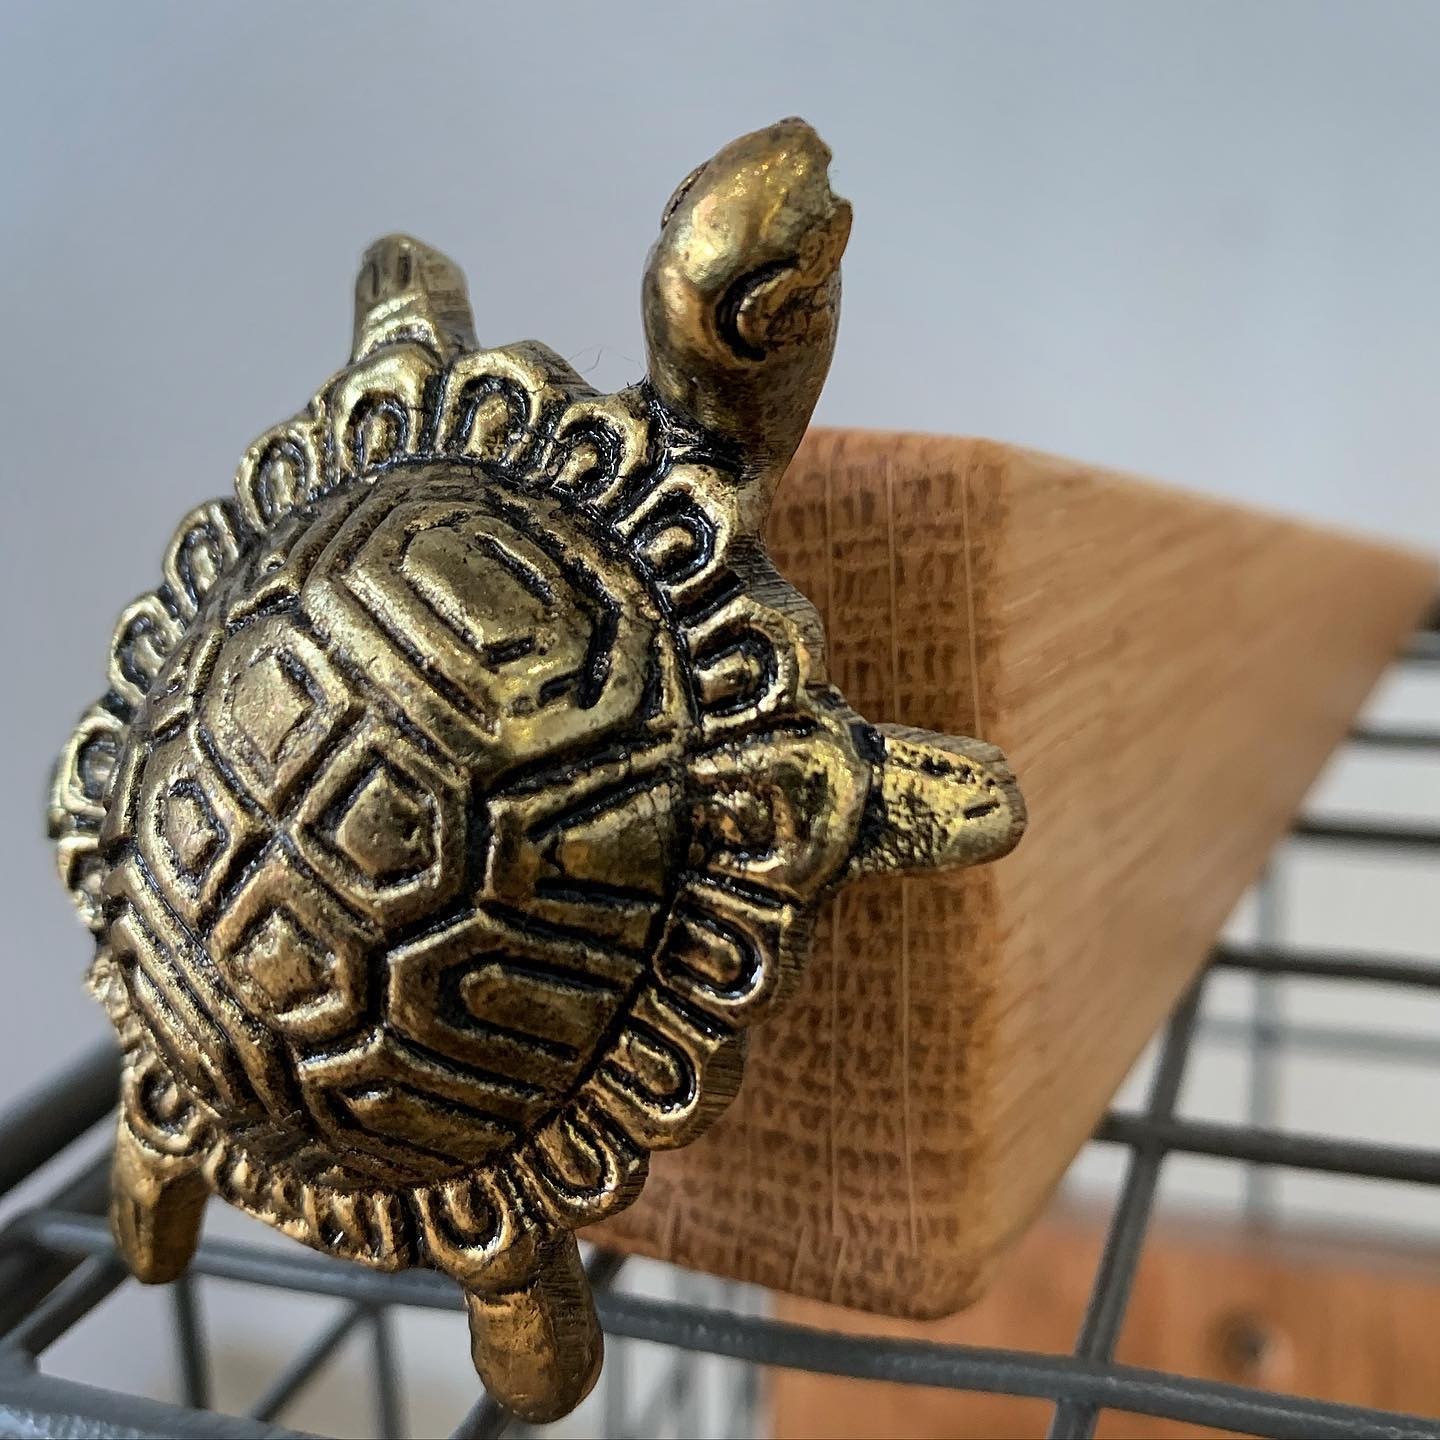 Love these little chaps! Turtle or tortoise? 🤔 We have a few of these today at @clevedonsundaymarket #new #doorwedge #homedecor #oak #handcrafted #gingerandtweed